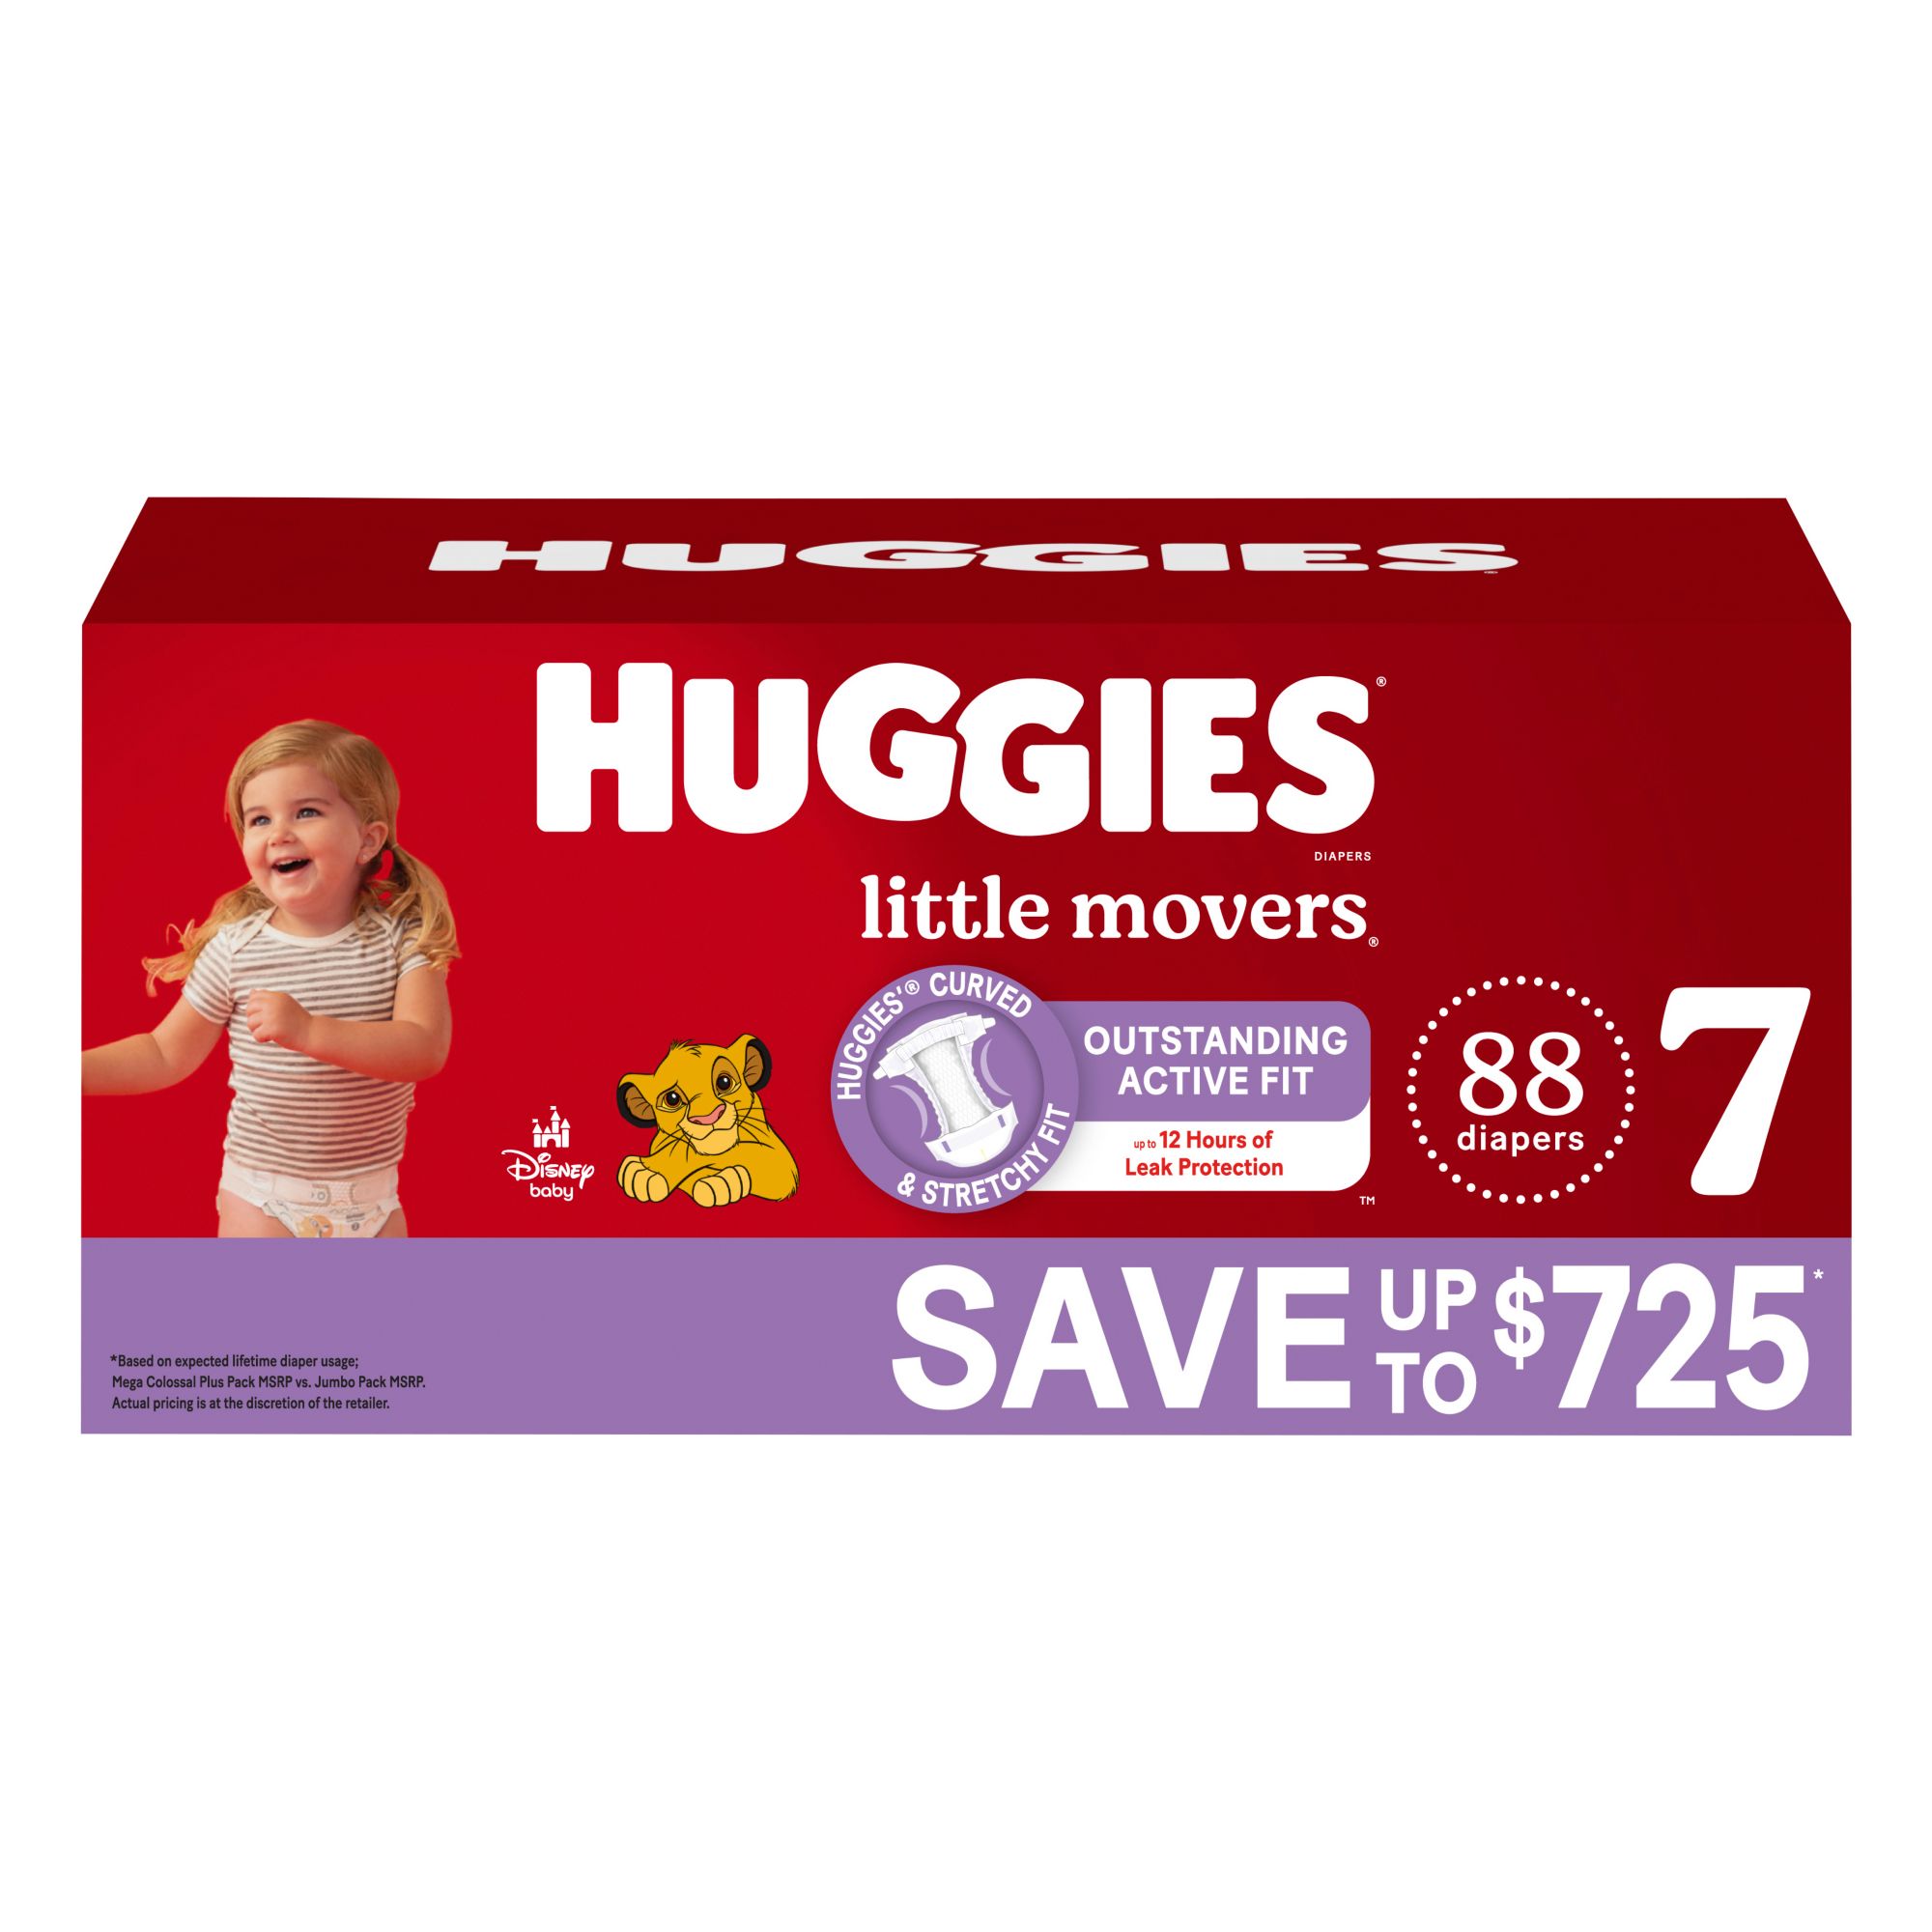 Soft As A Baby's Bum: Huggies Edition